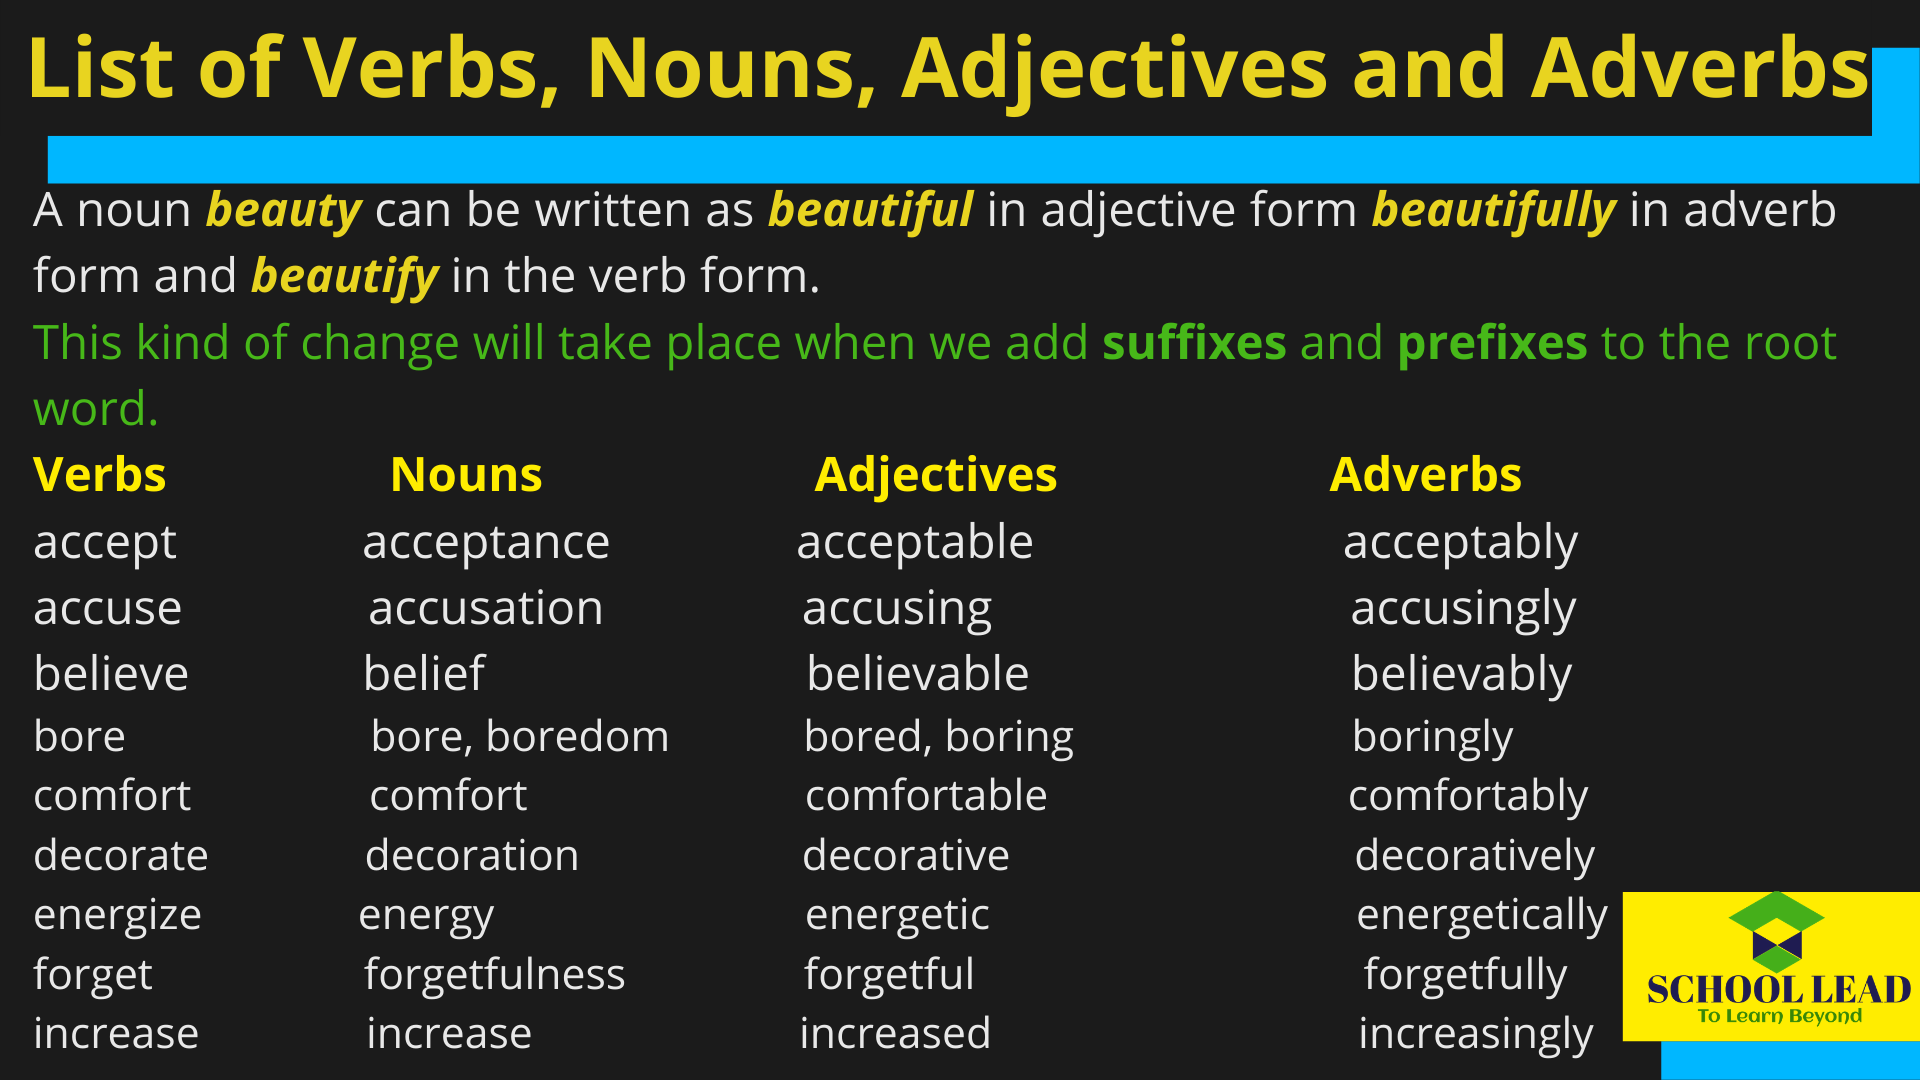 list-of-verbs-nouns-adjectives-and-adverbs-school-lead-list-of